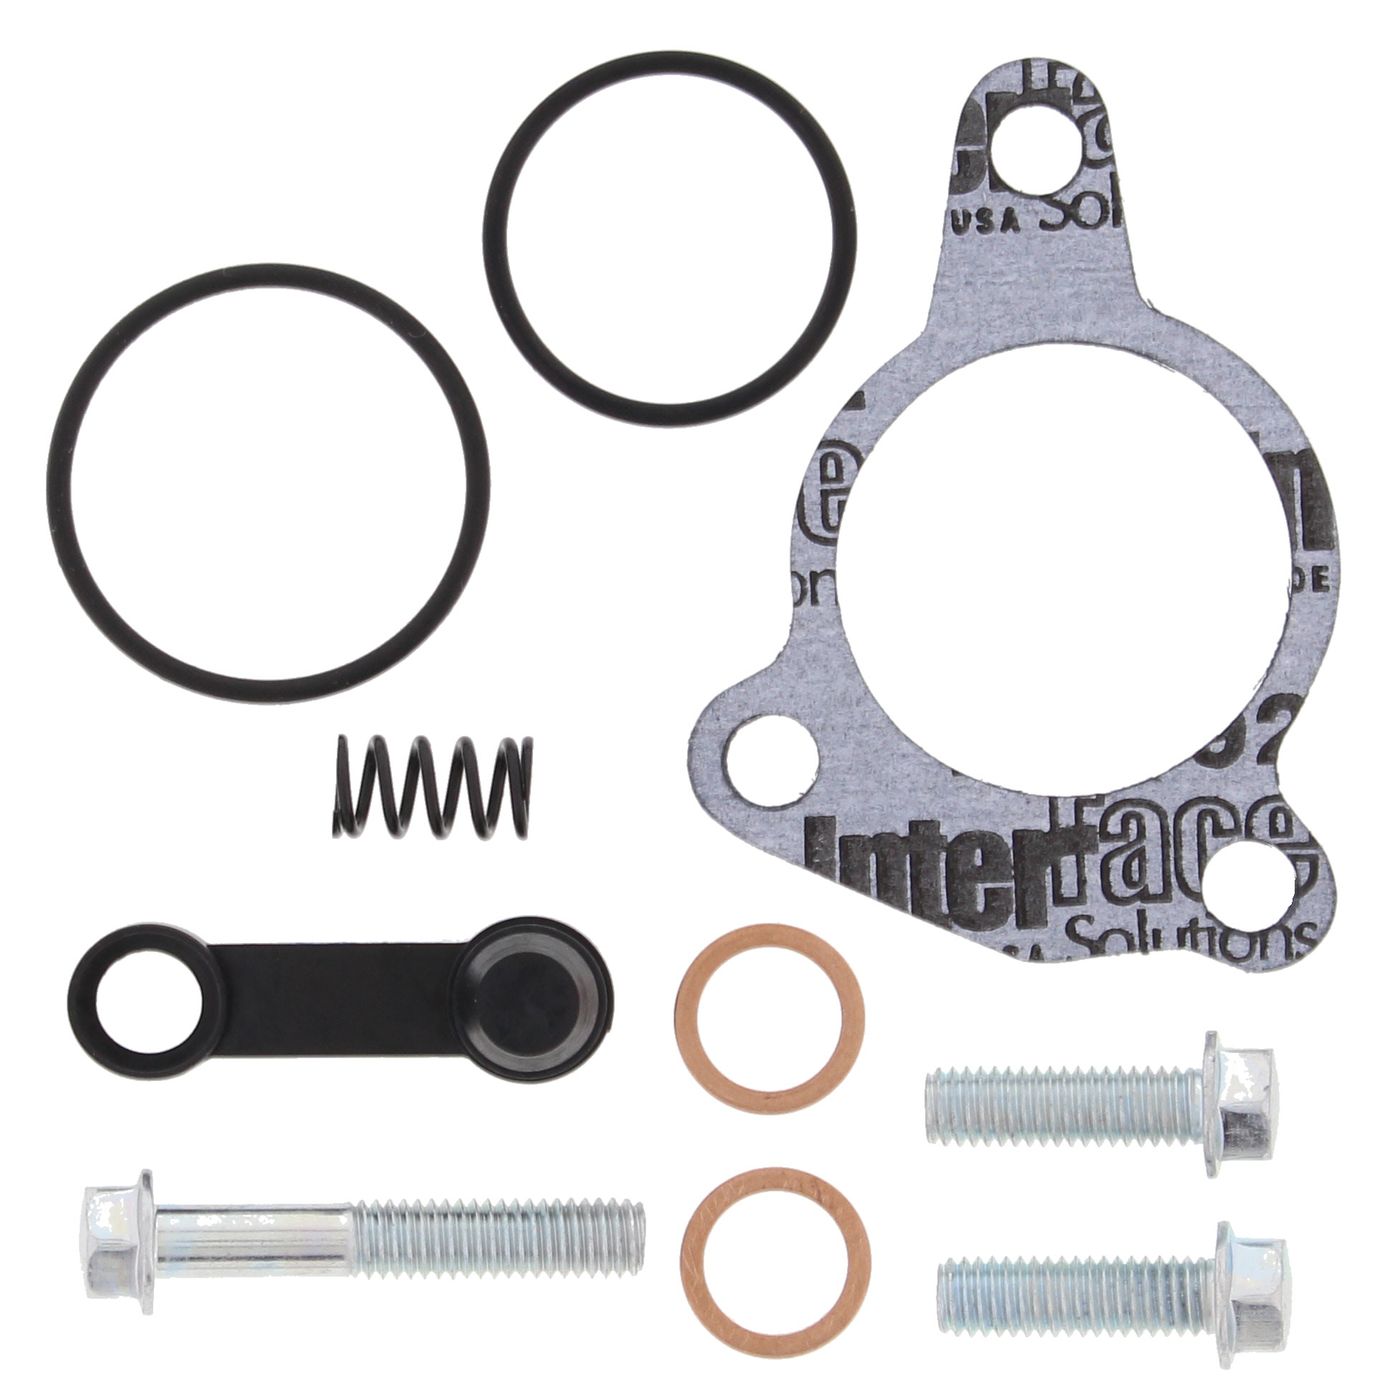 Wrp Clutch Slave Cylinder Kits - WRP186002 image